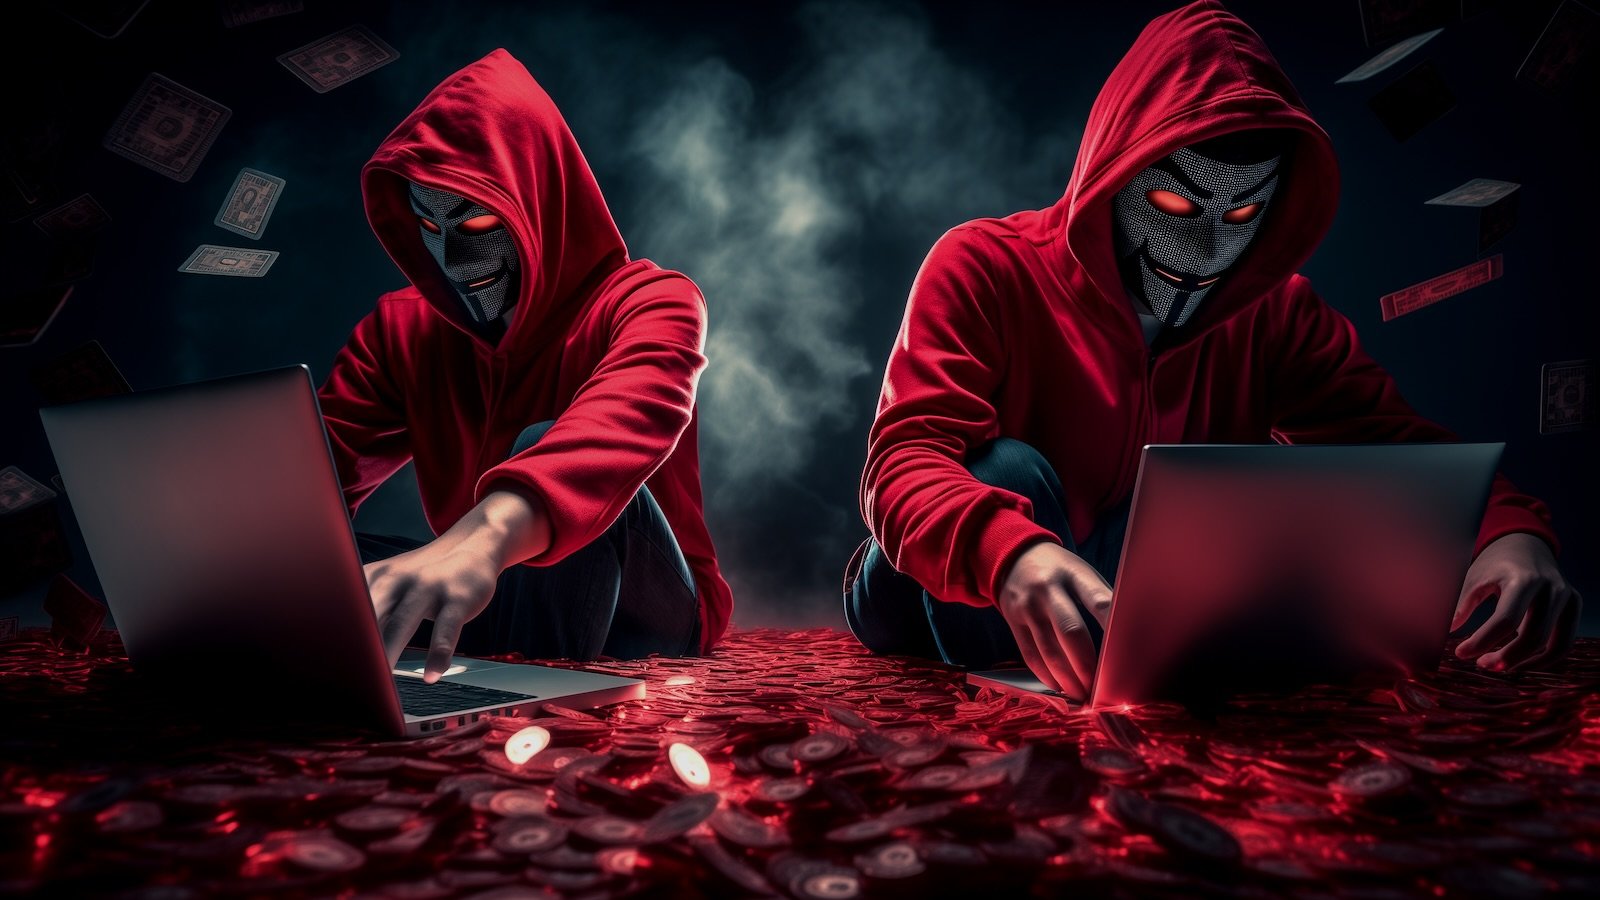 Hackers stealing cryptocurrency